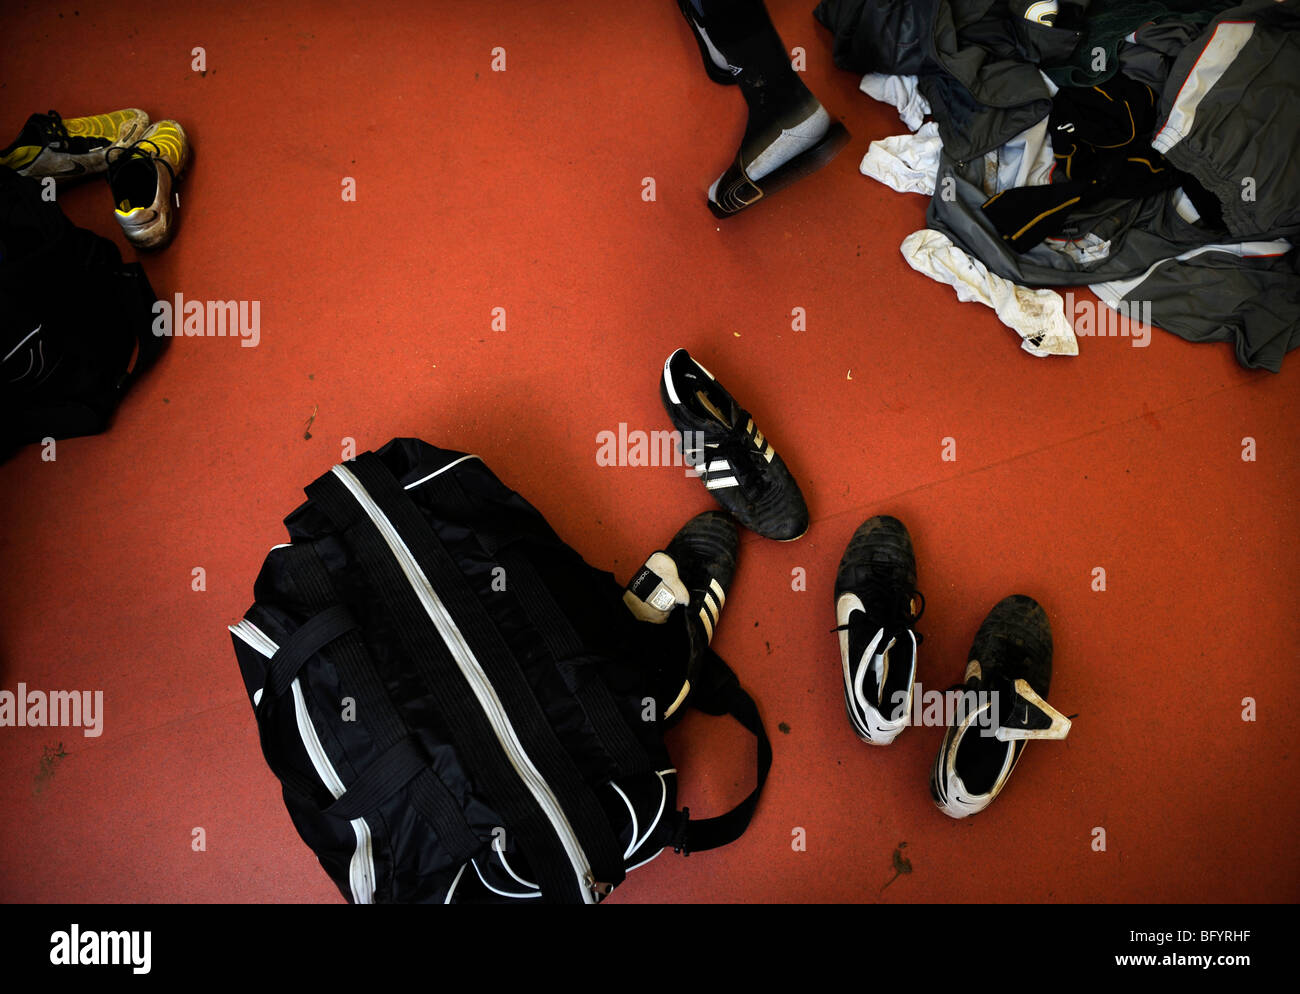 A footballers changing room with dirty kit piled on the floor UK Stock Photo